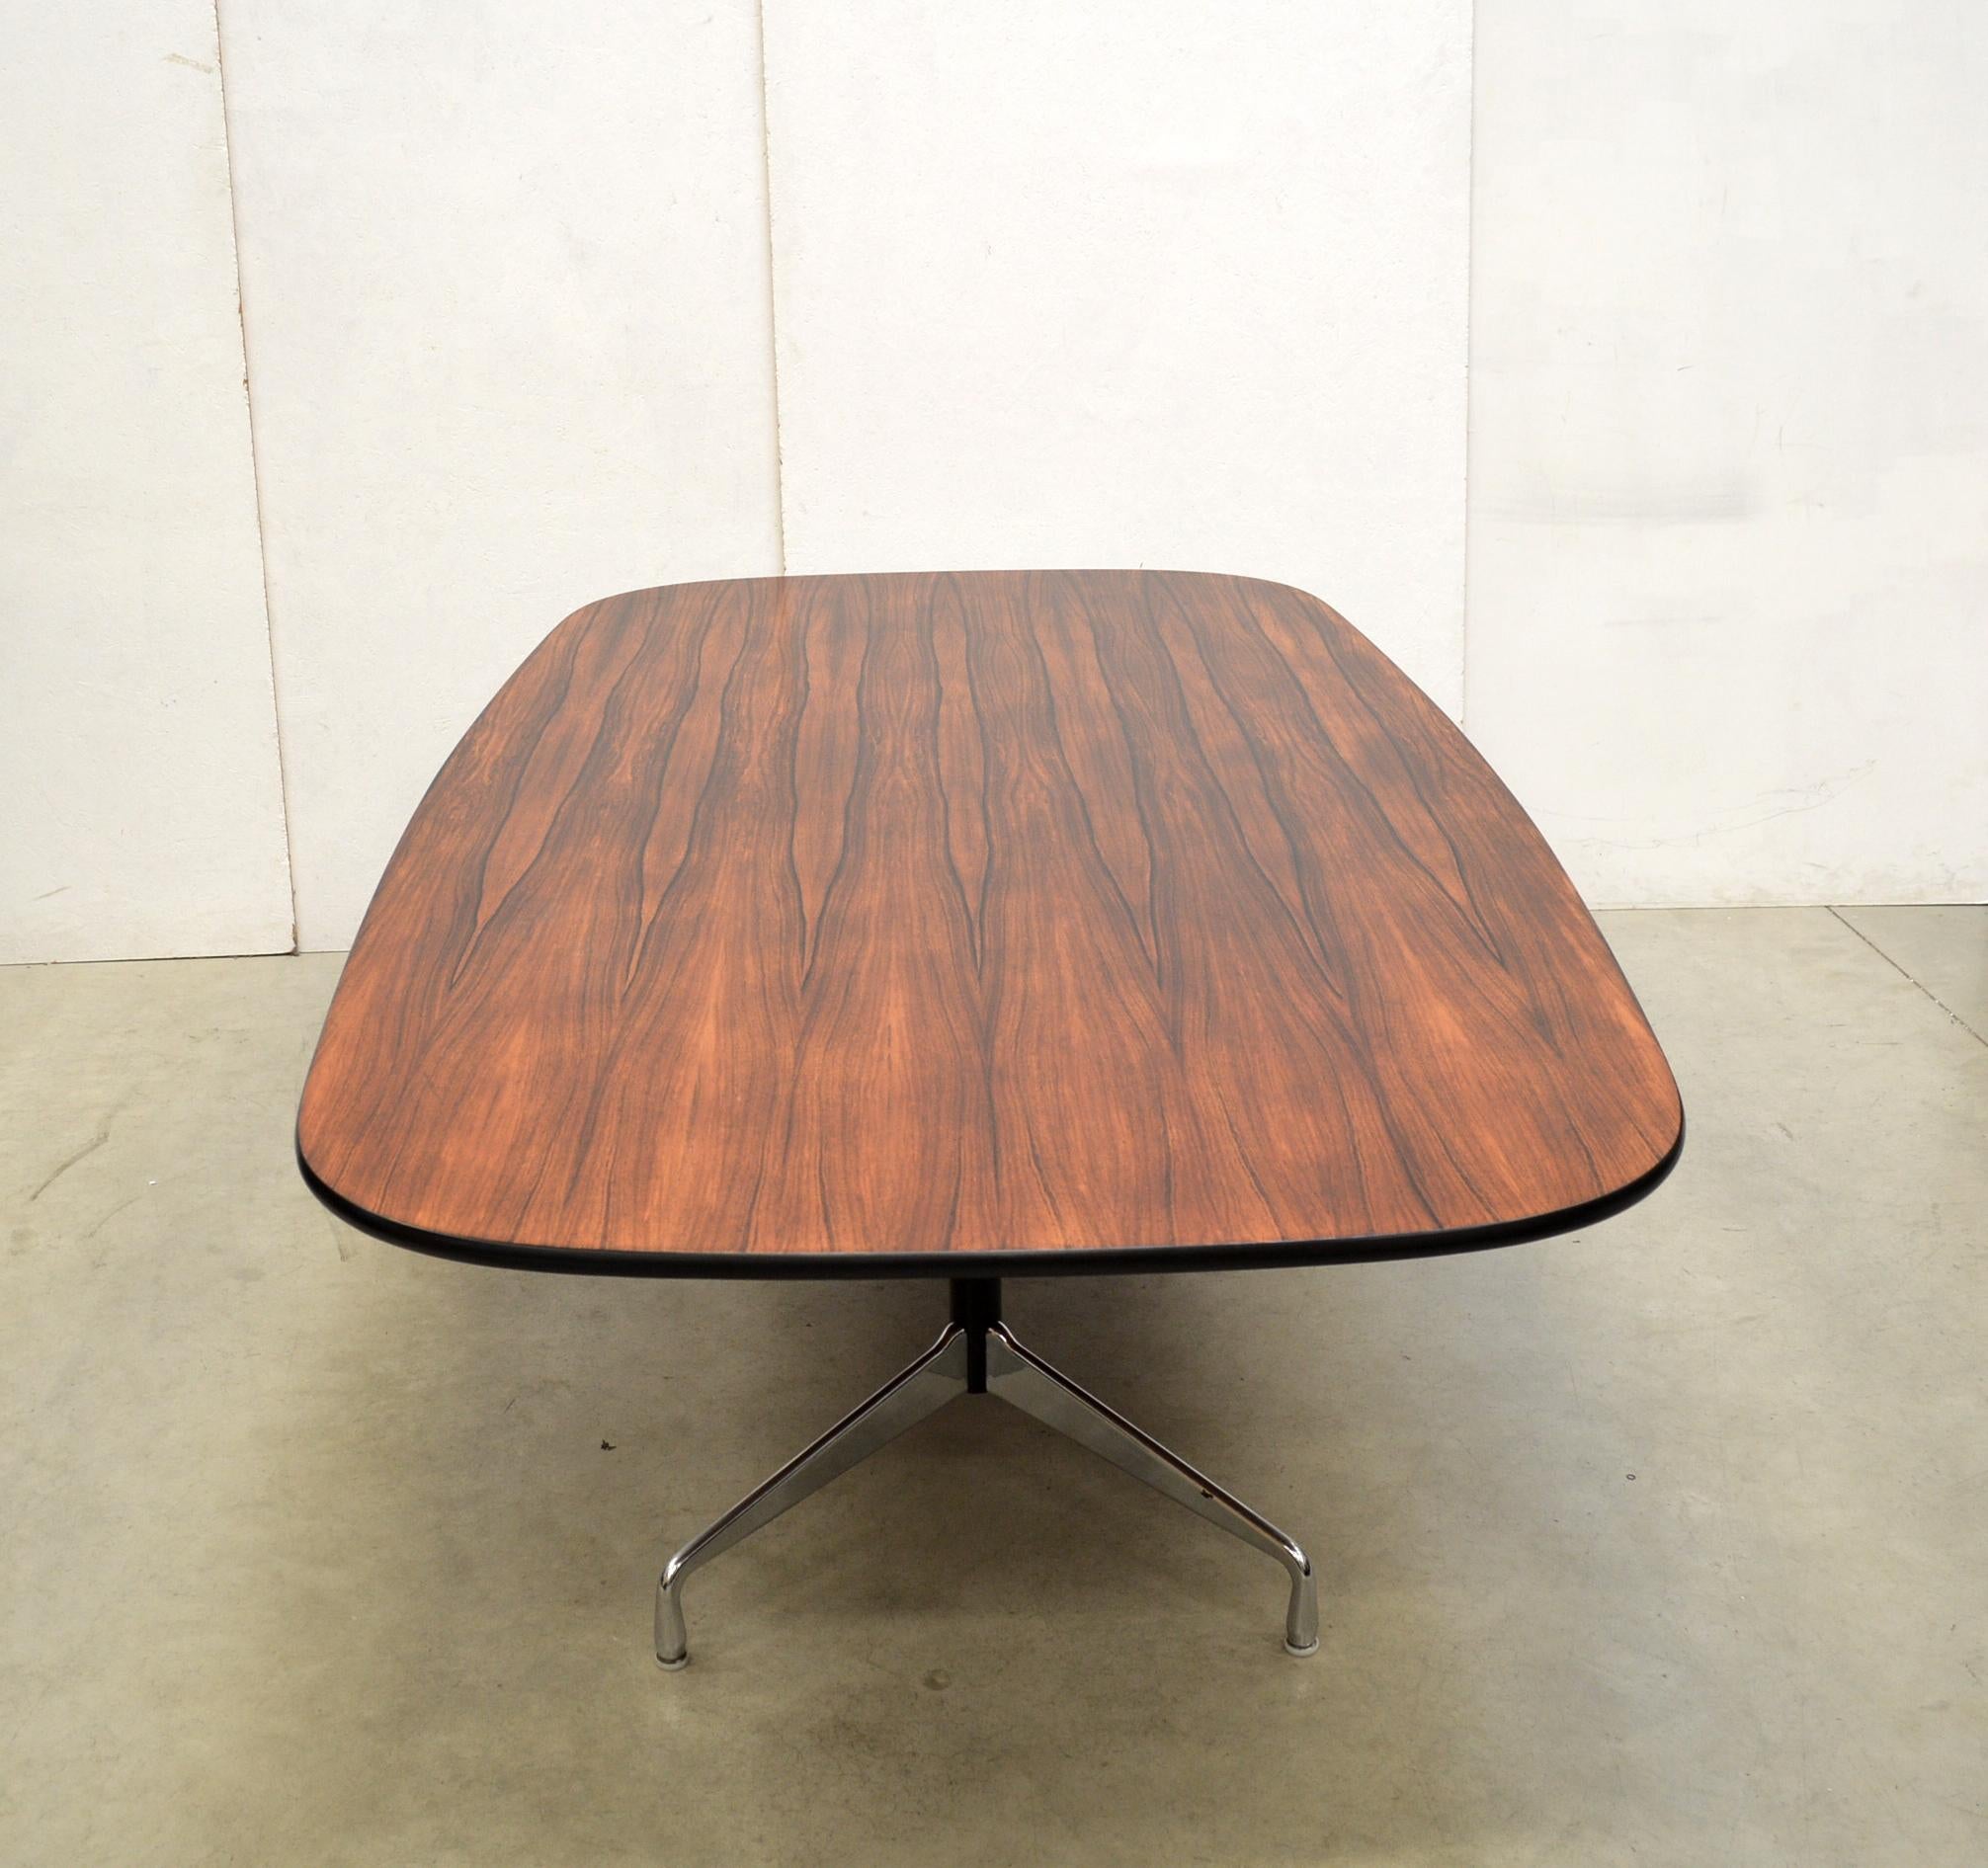 Fine and rare segmented table by Charles Eames for Herman Miller.
Table is perfect useable as a conference or dining table.

It is the larger 8-foot example.

The table was made and designed in the United States in the 1970s.
Very nice example